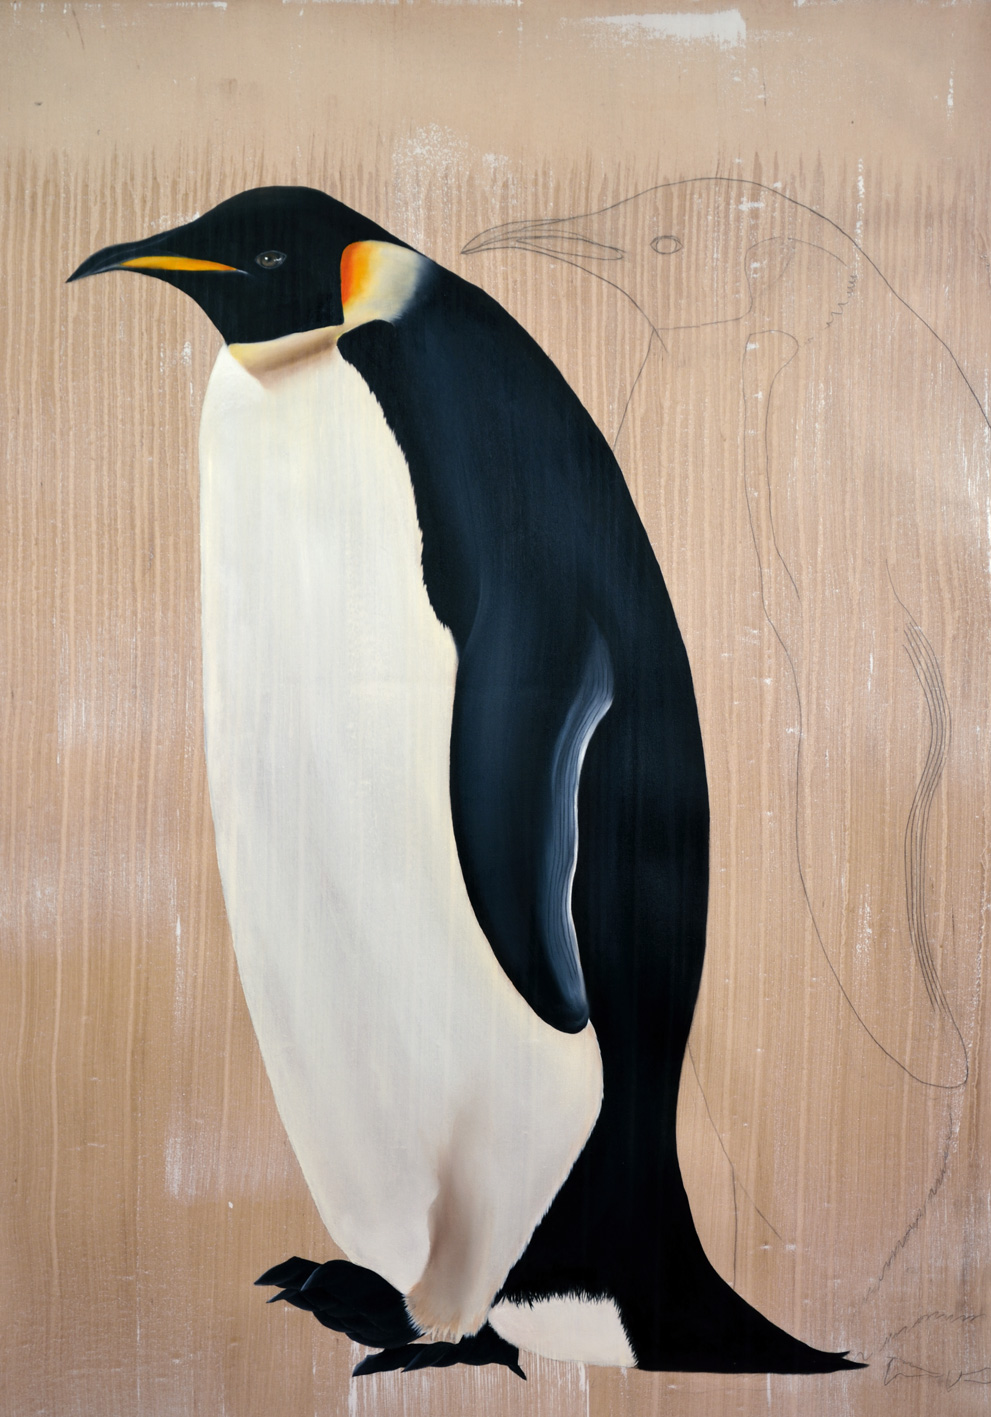 MANCHOT-EMPEREUR penguin-emperor-deco-decoration-large-size-printed-canvas-luxury-high-quality Thierry Bisch Contemporary painter animals painting art  nature biodiversity conservation 